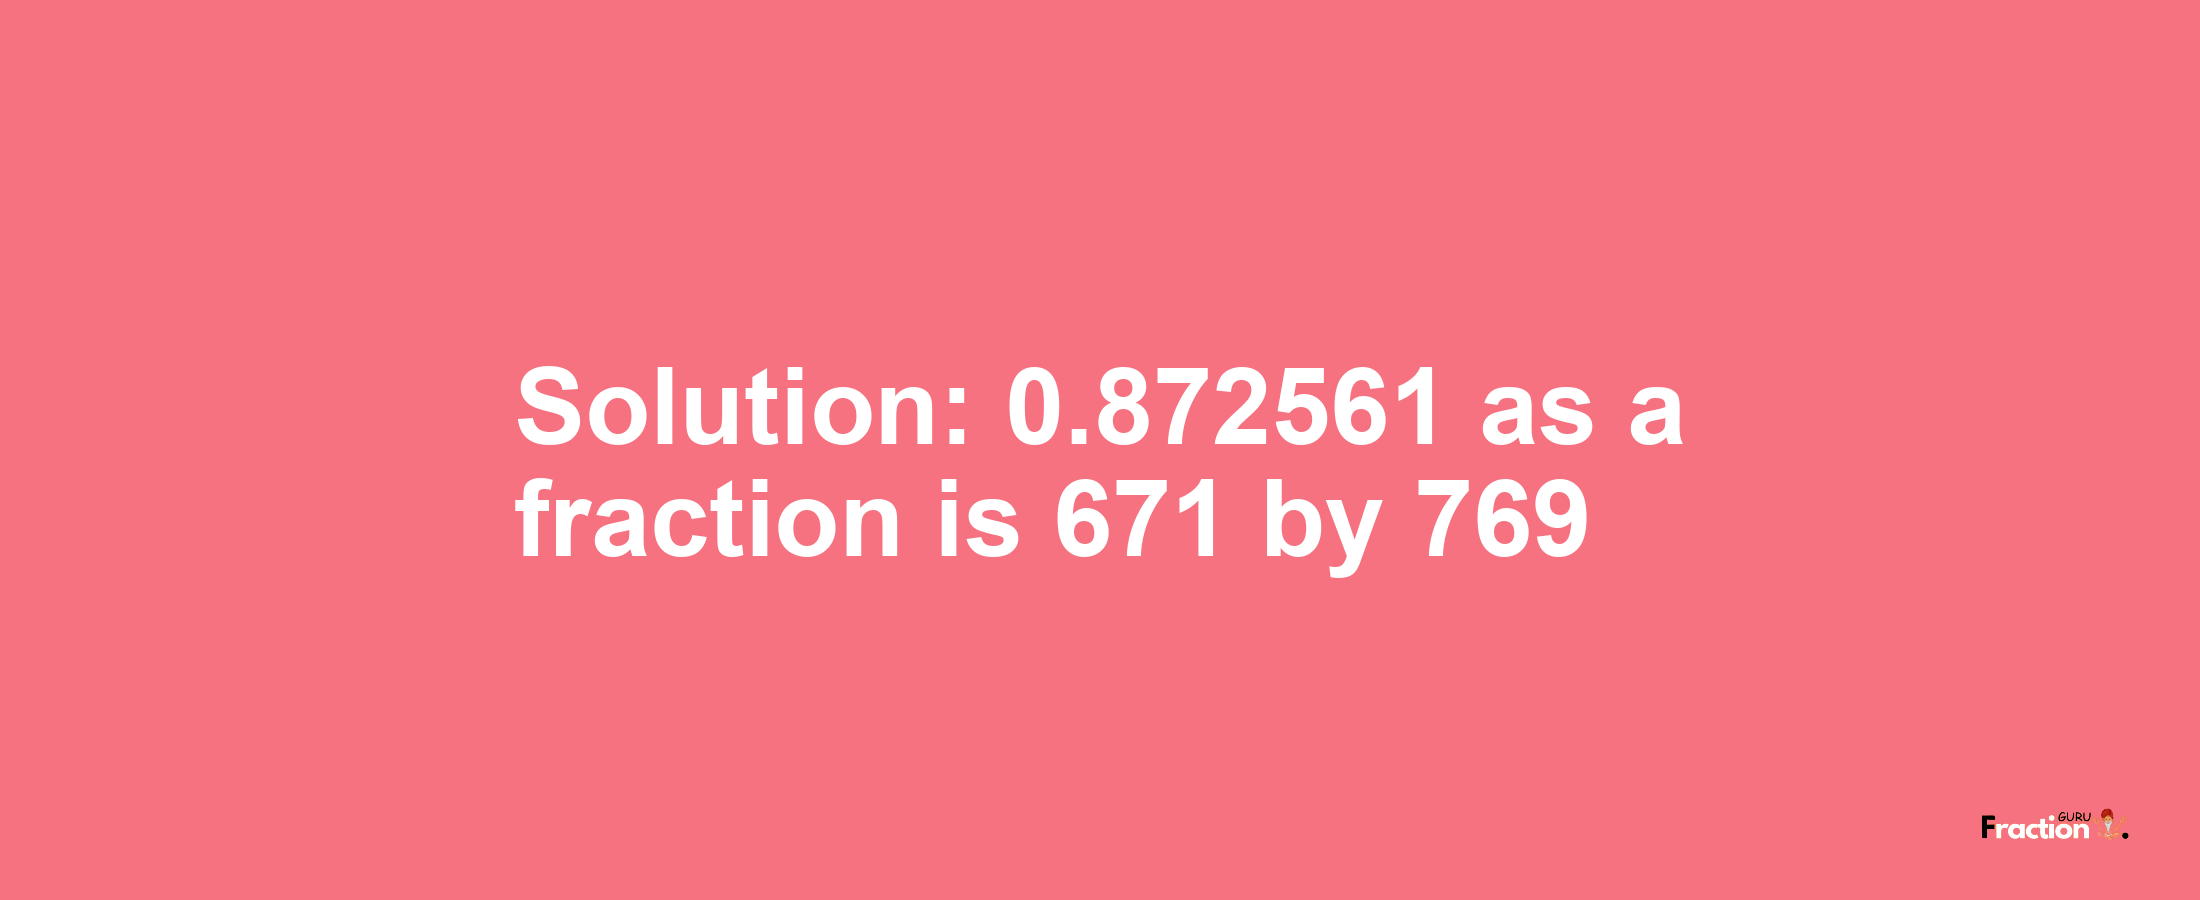 Solution:0.872561 as a fraction is 671/769